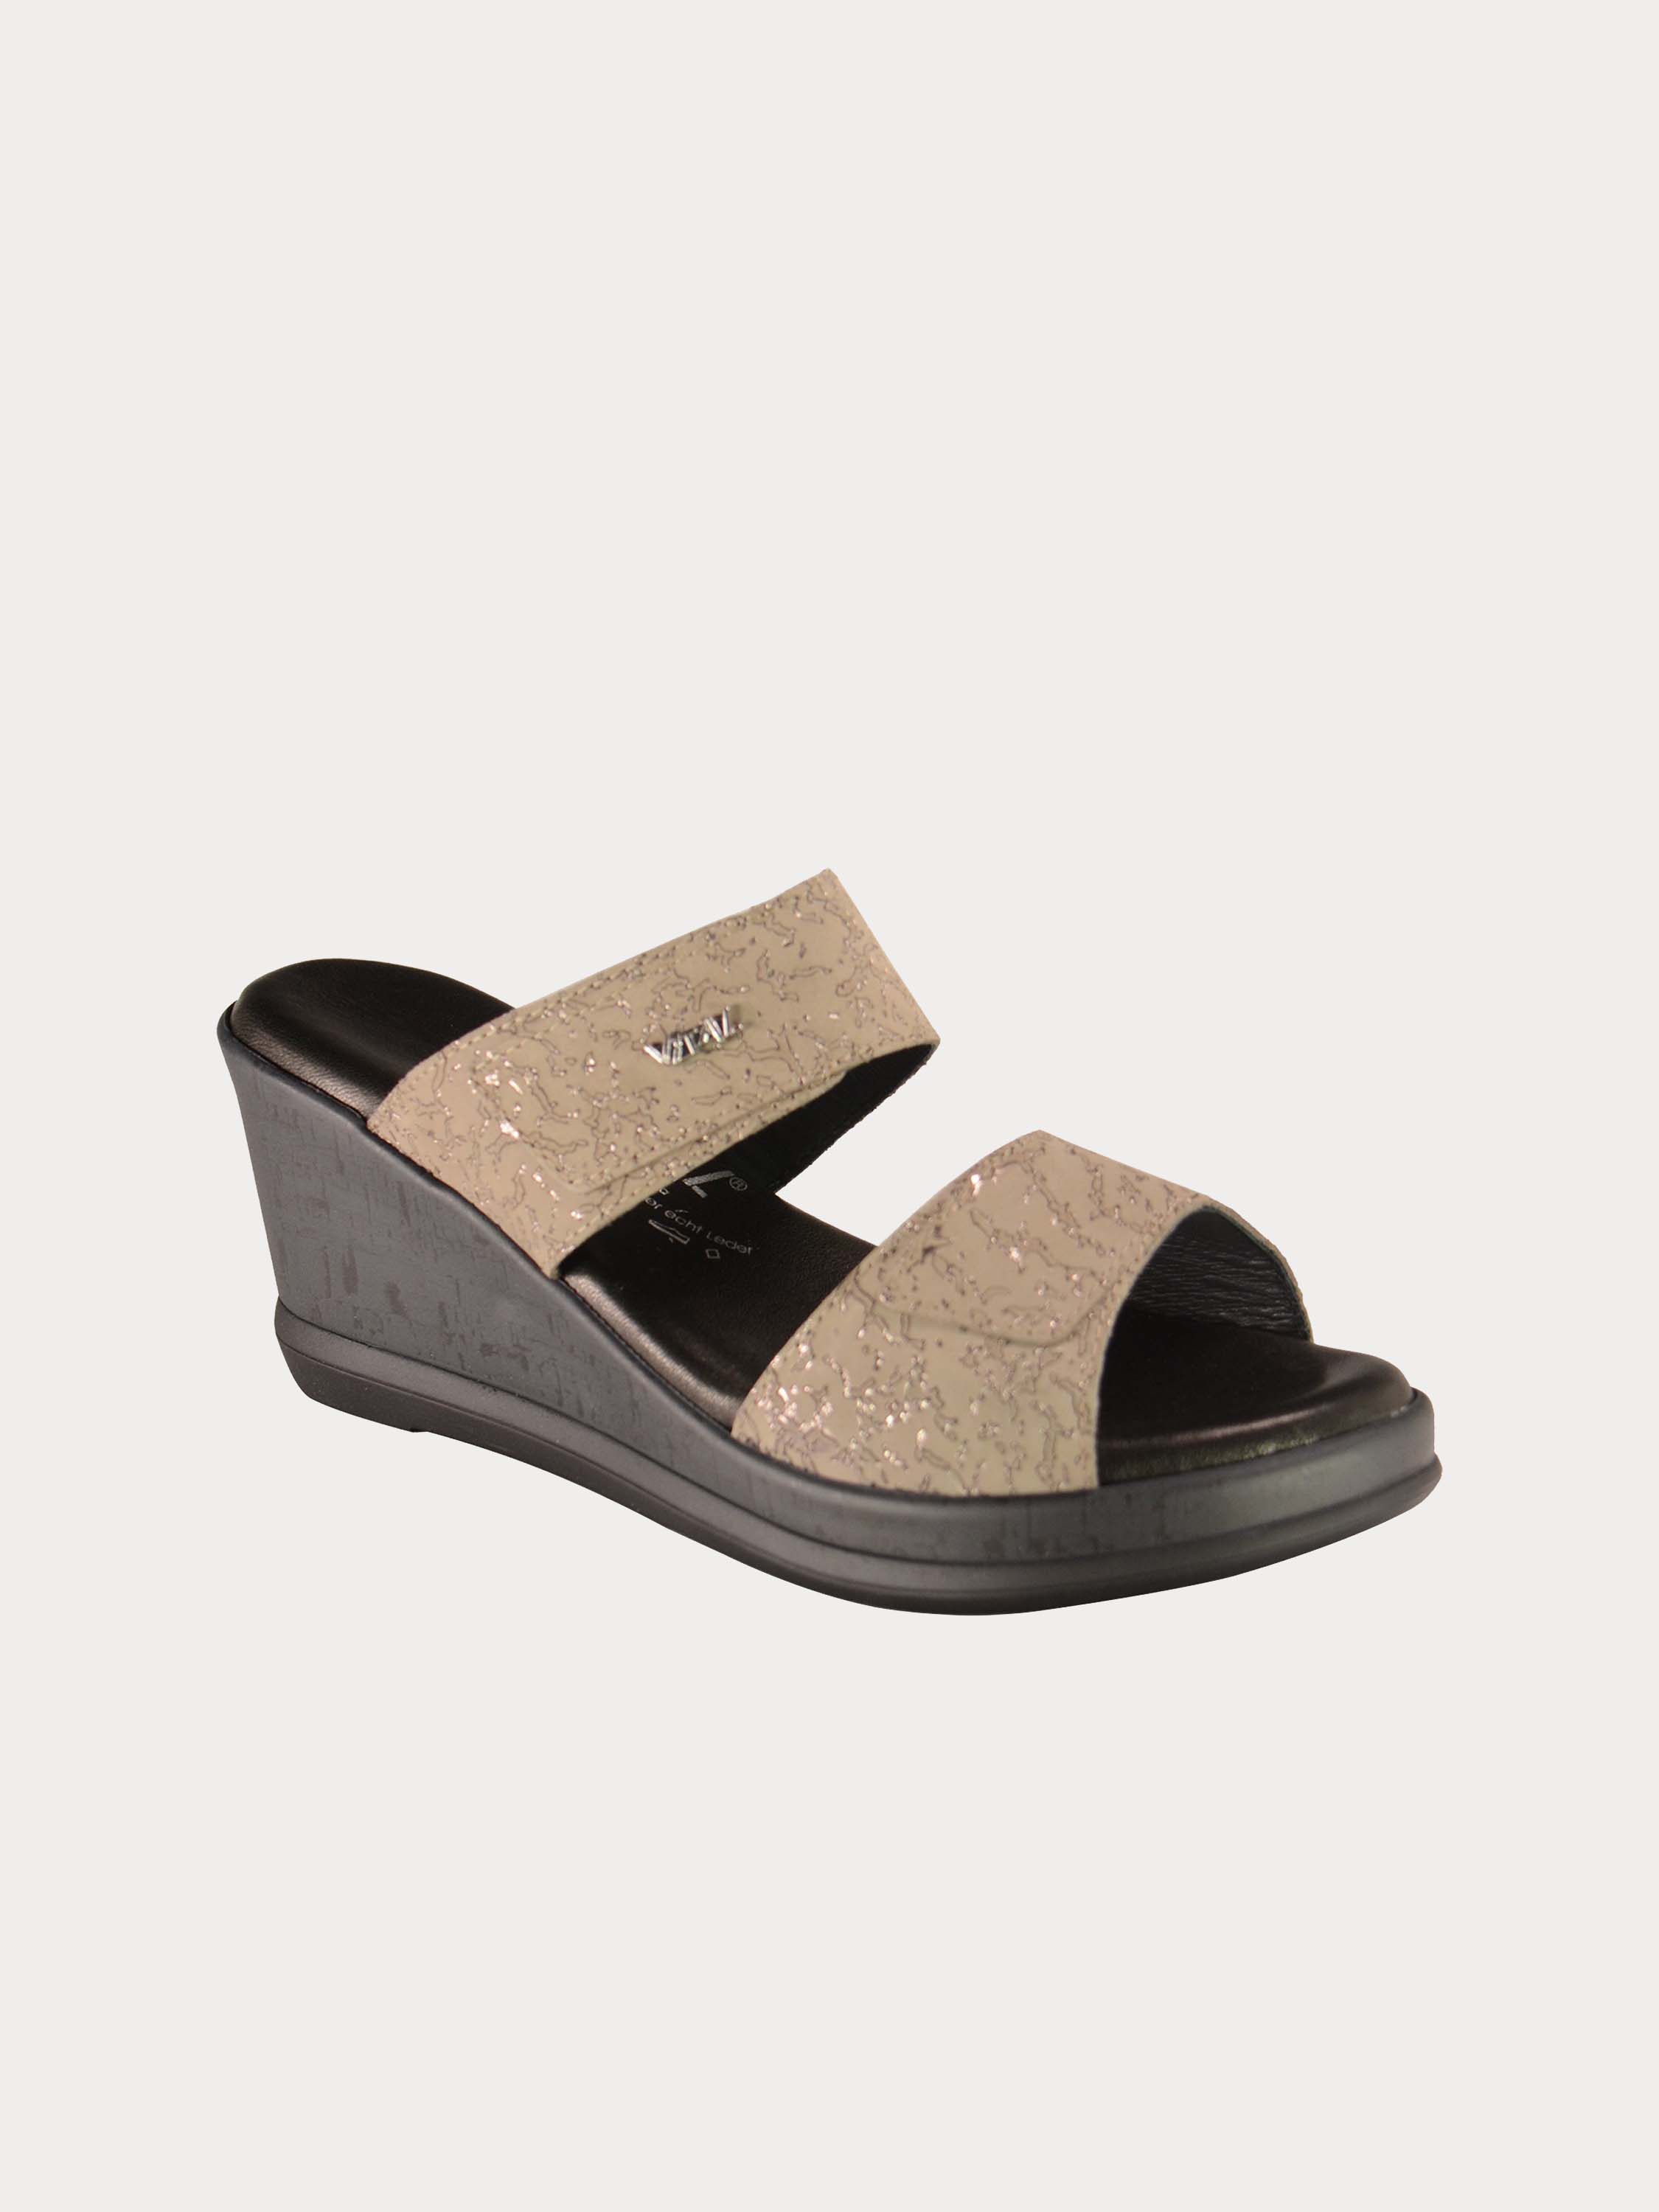 Vital Women's Leather Wedges #color_Beige